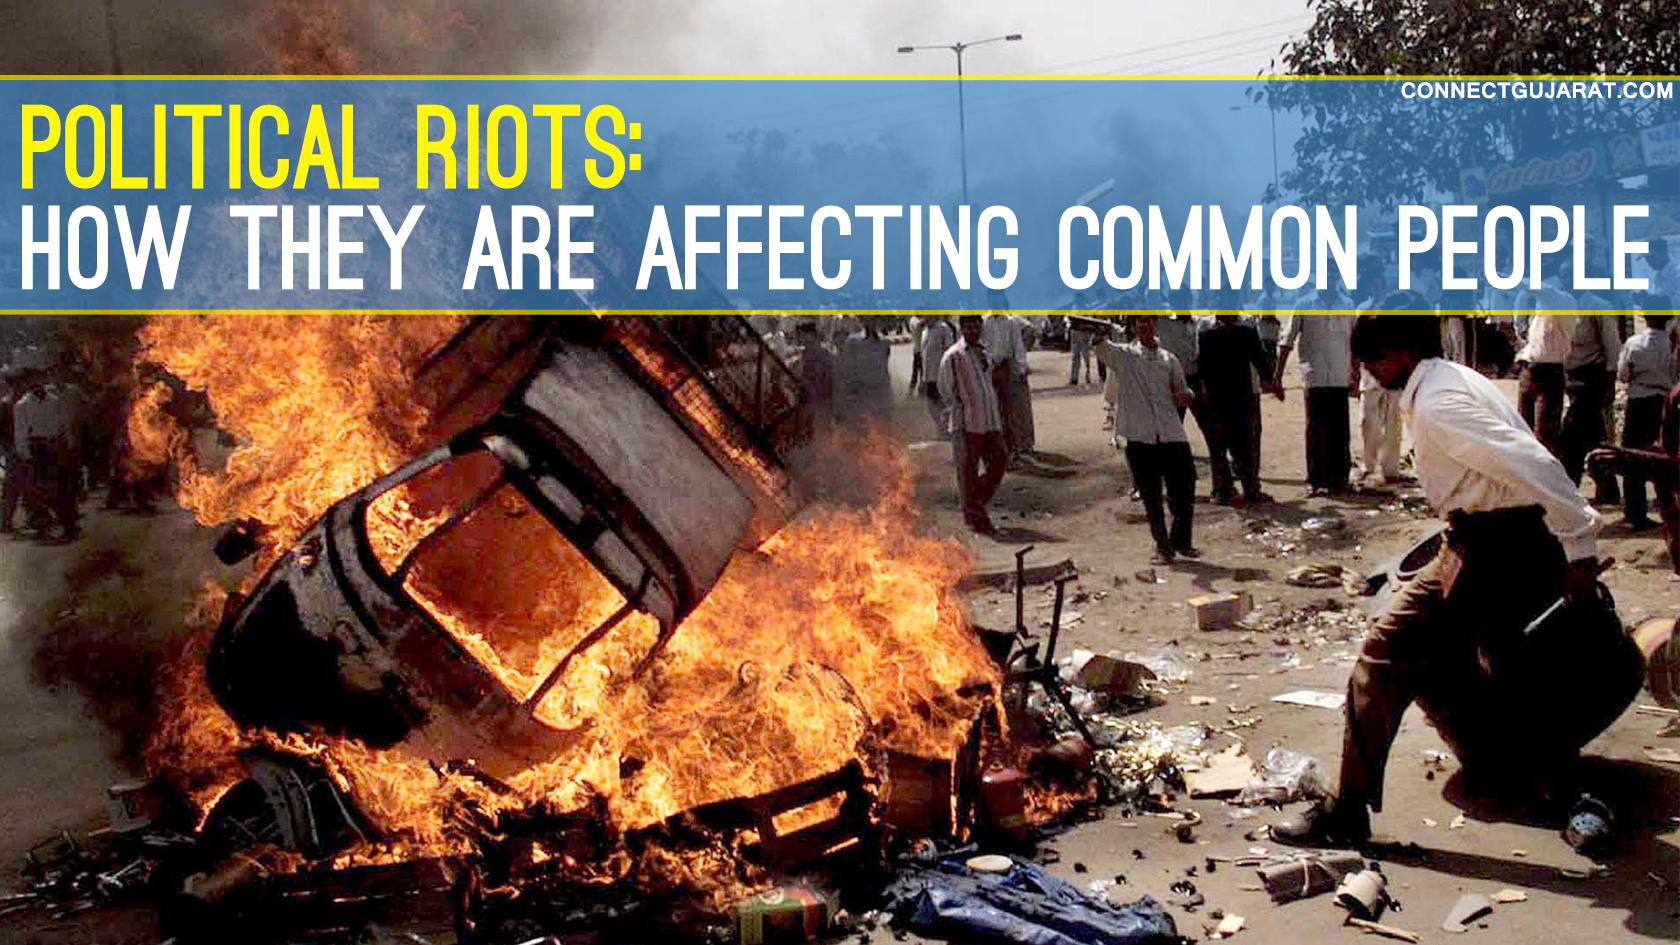 Political Riots: How they are affecting common people